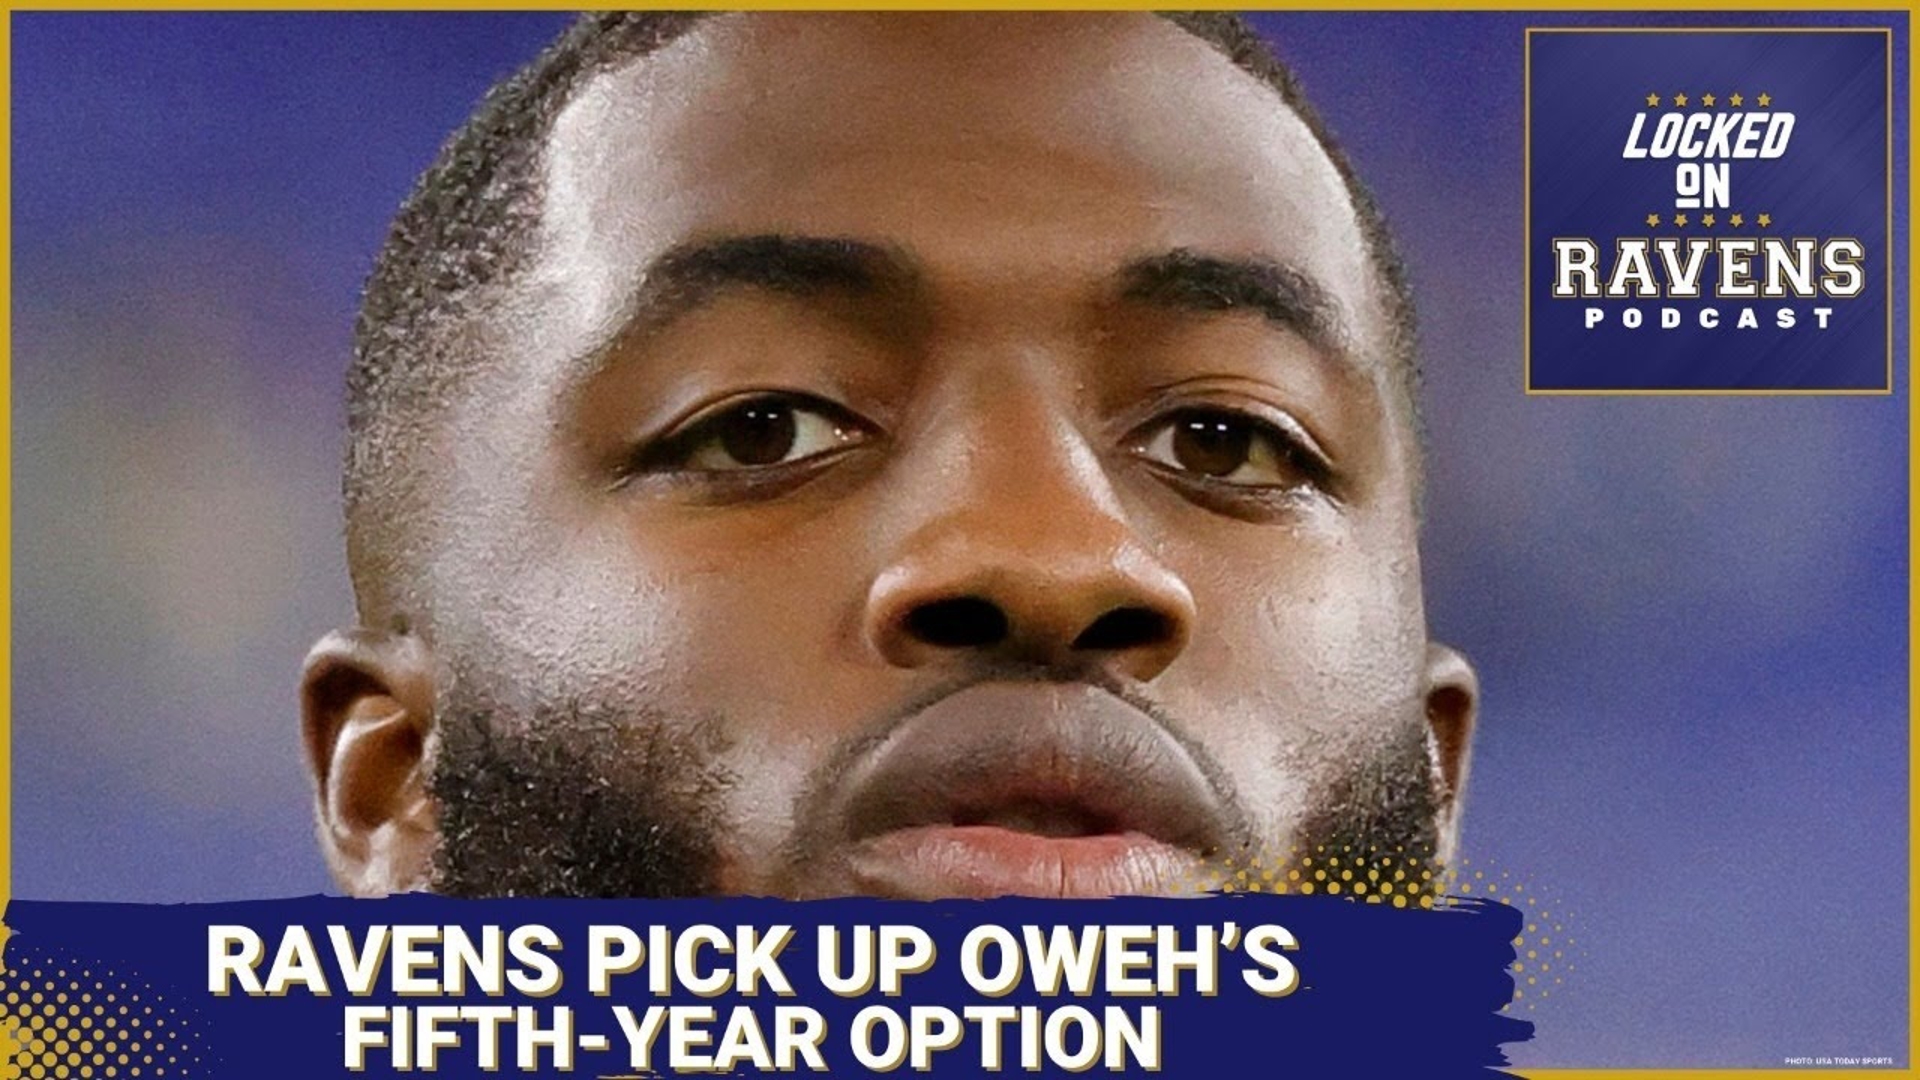 We look at the Baltimore Ravens picking up the fifth-year option on outside linebacker Odafe Oweh, looking at the decision and more.